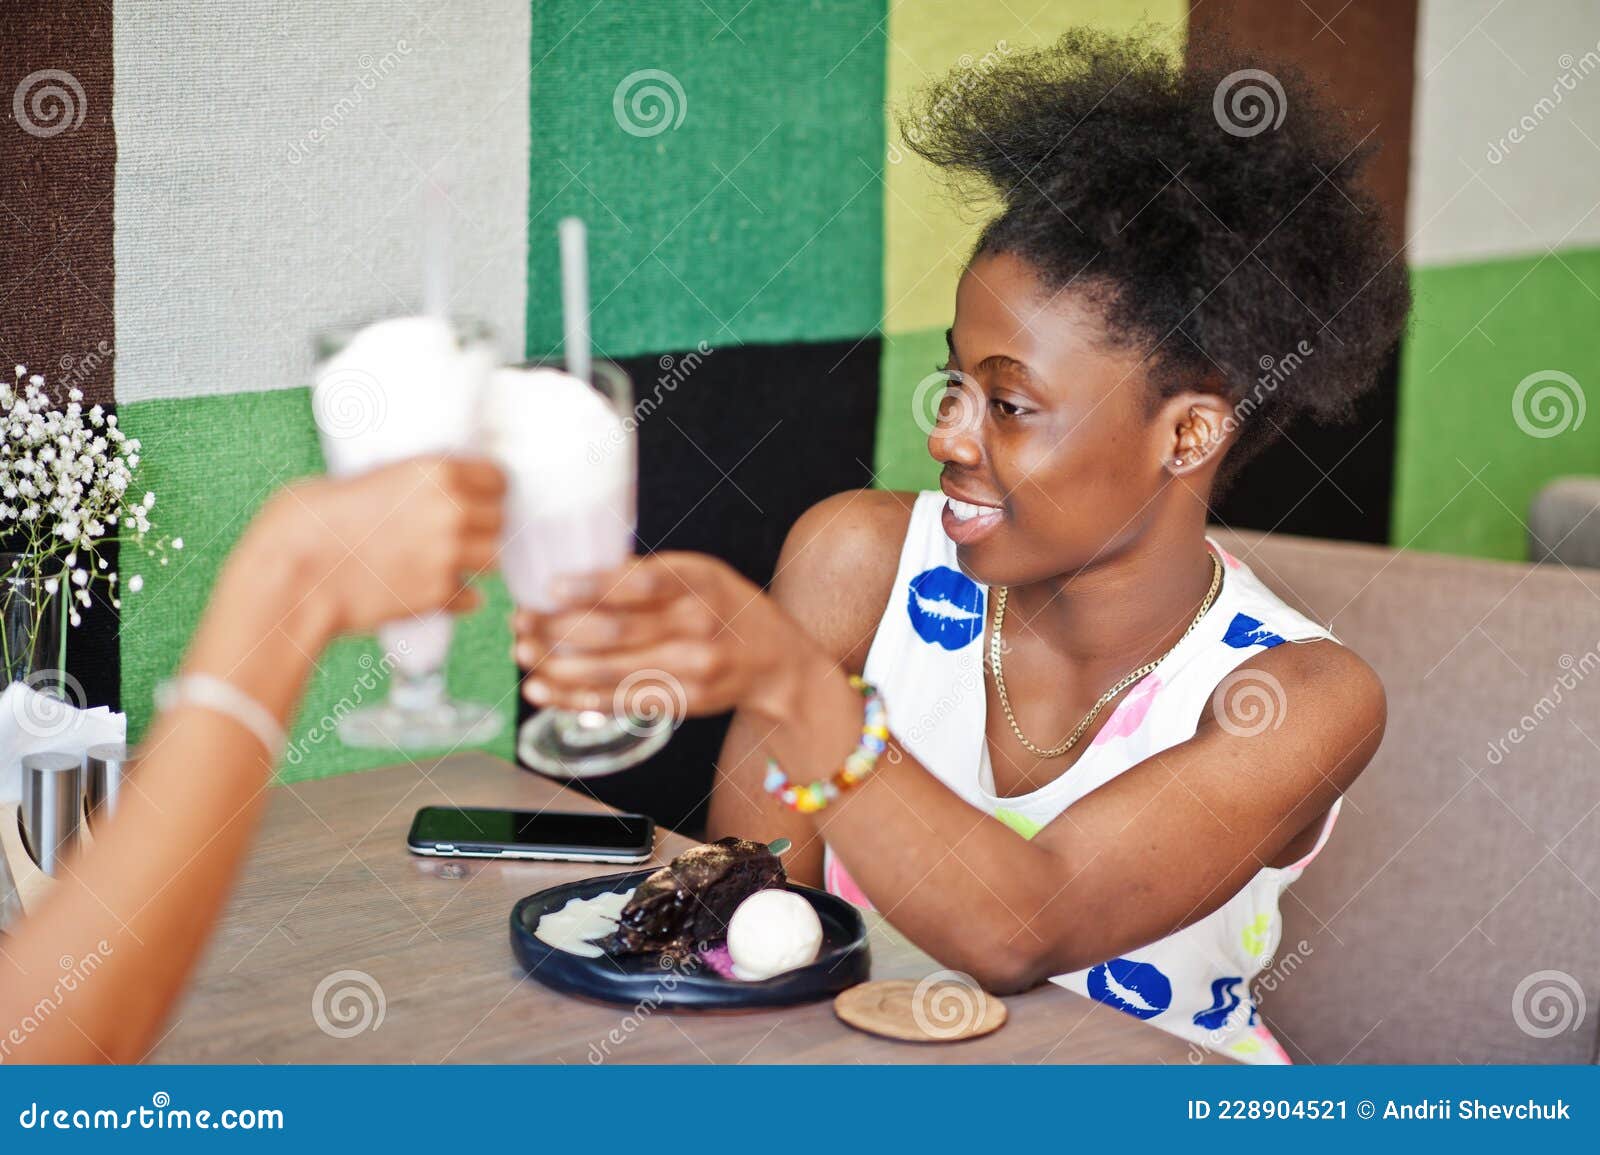 Two Black African Girlfriends at Summer Dresses Posed at Caf pic